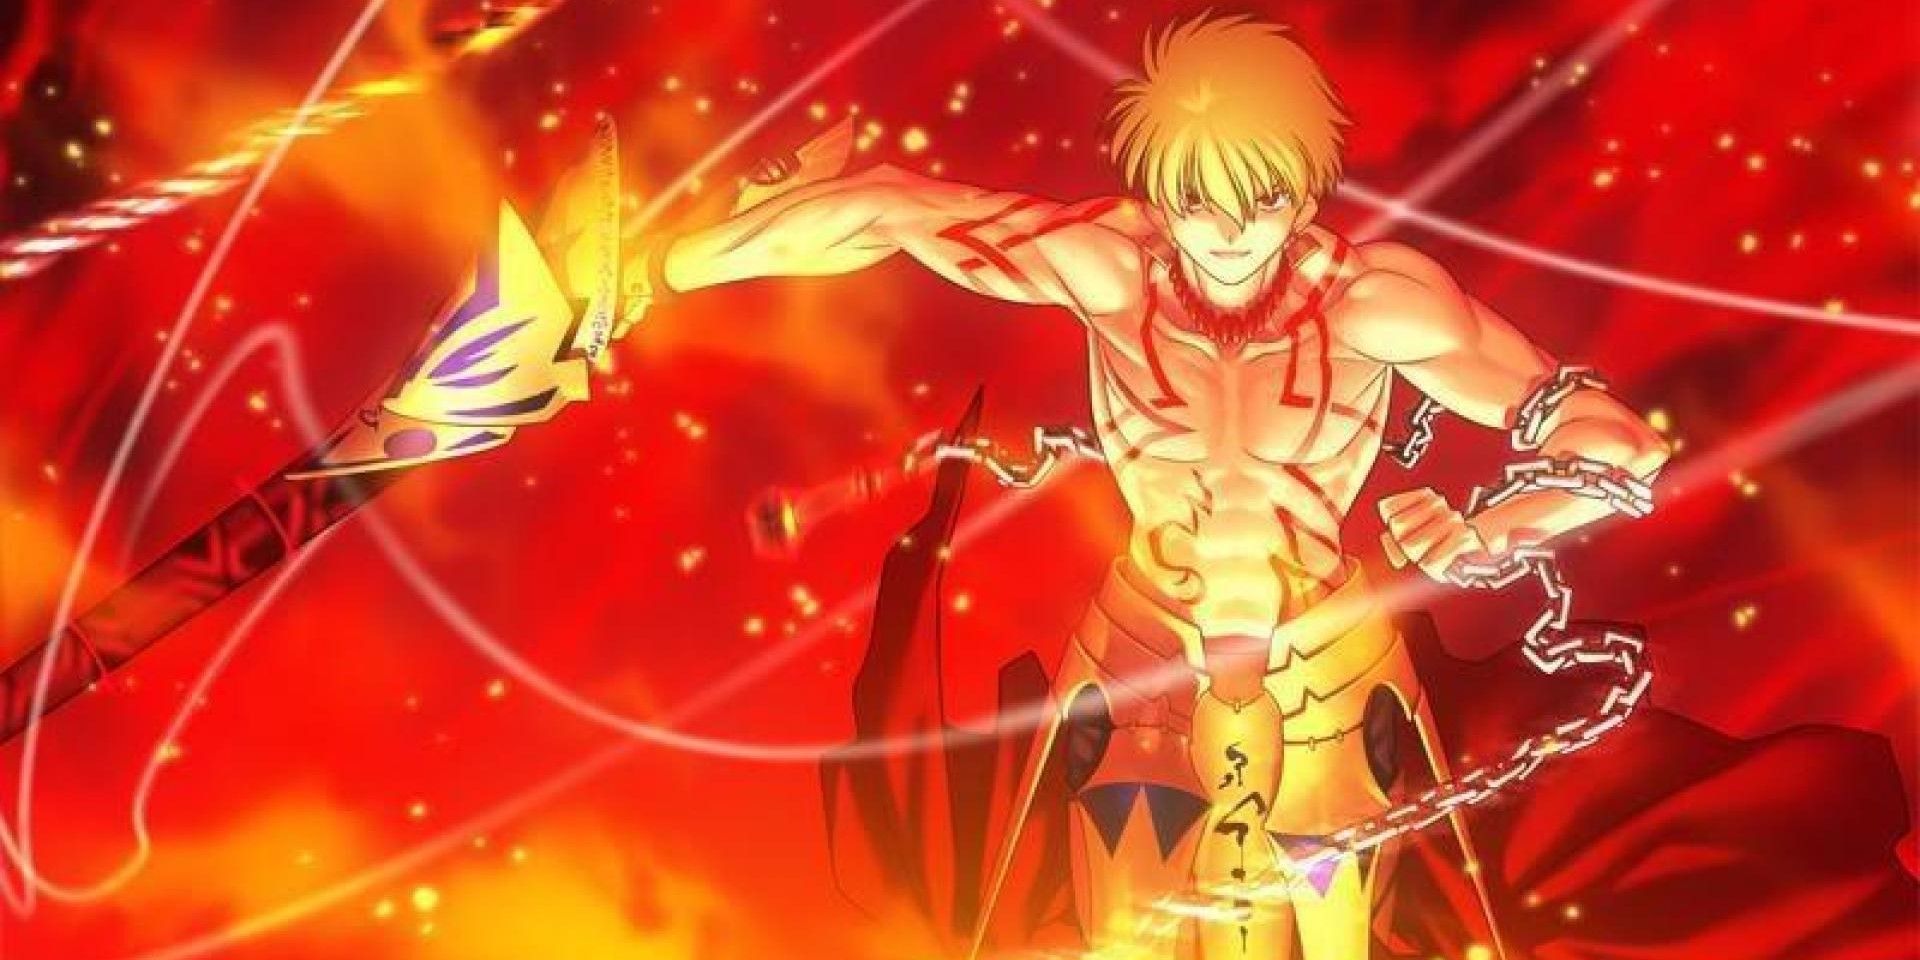 Gilgamesh in Fate/Stay Night surrounded by fire